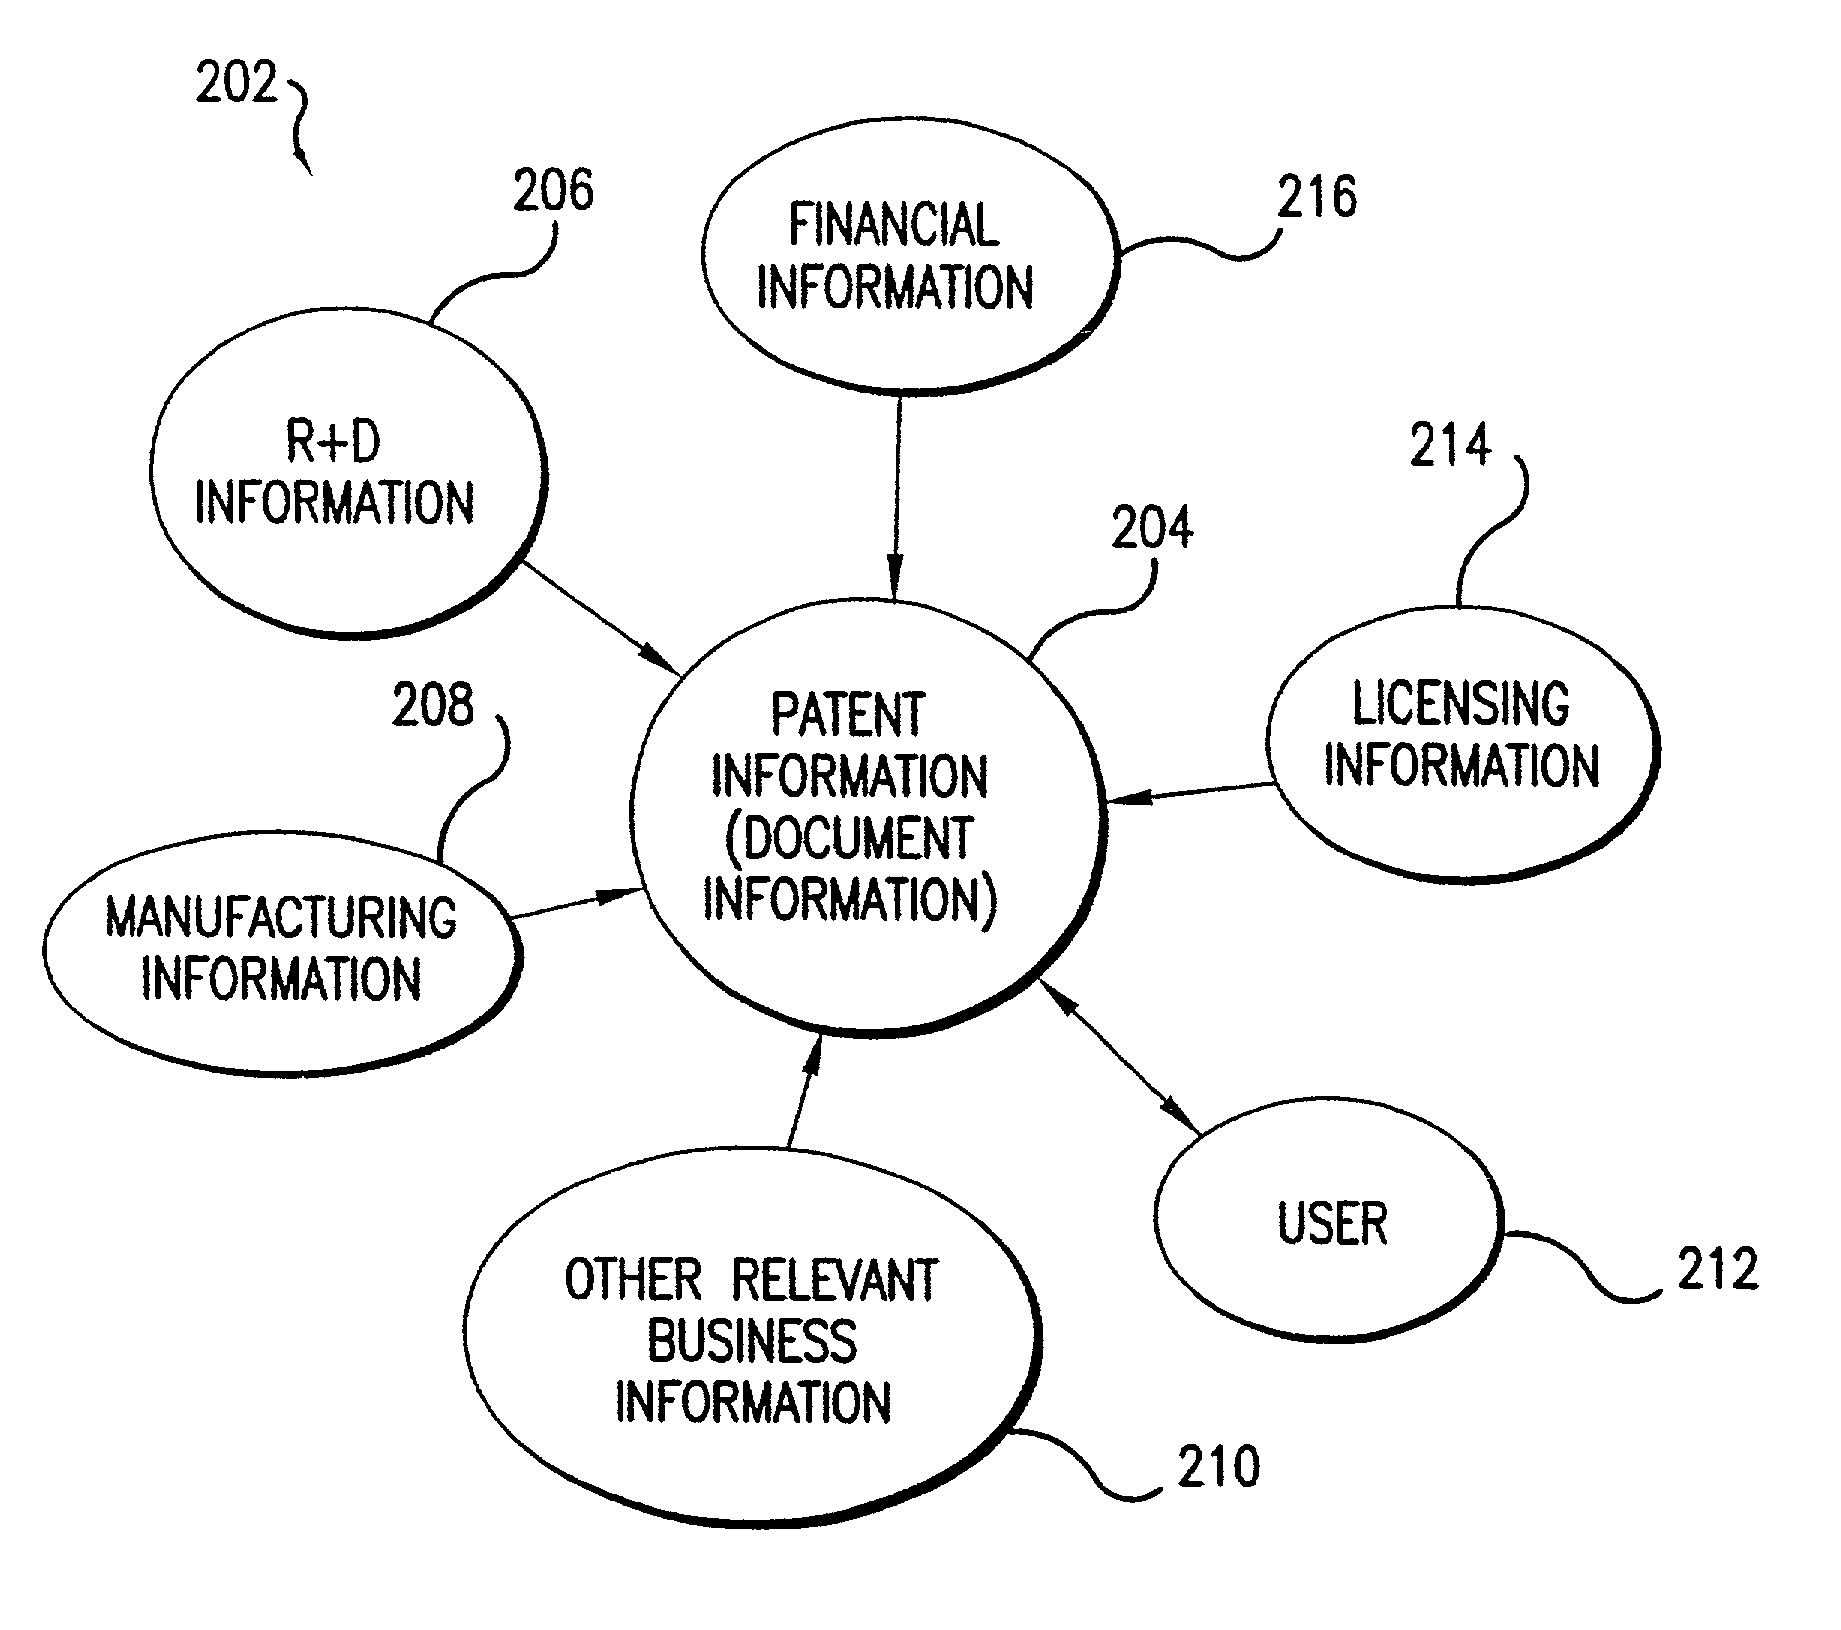 Using hyperbolic trees to visualize data generated by patent-centric and group-oriented data processing